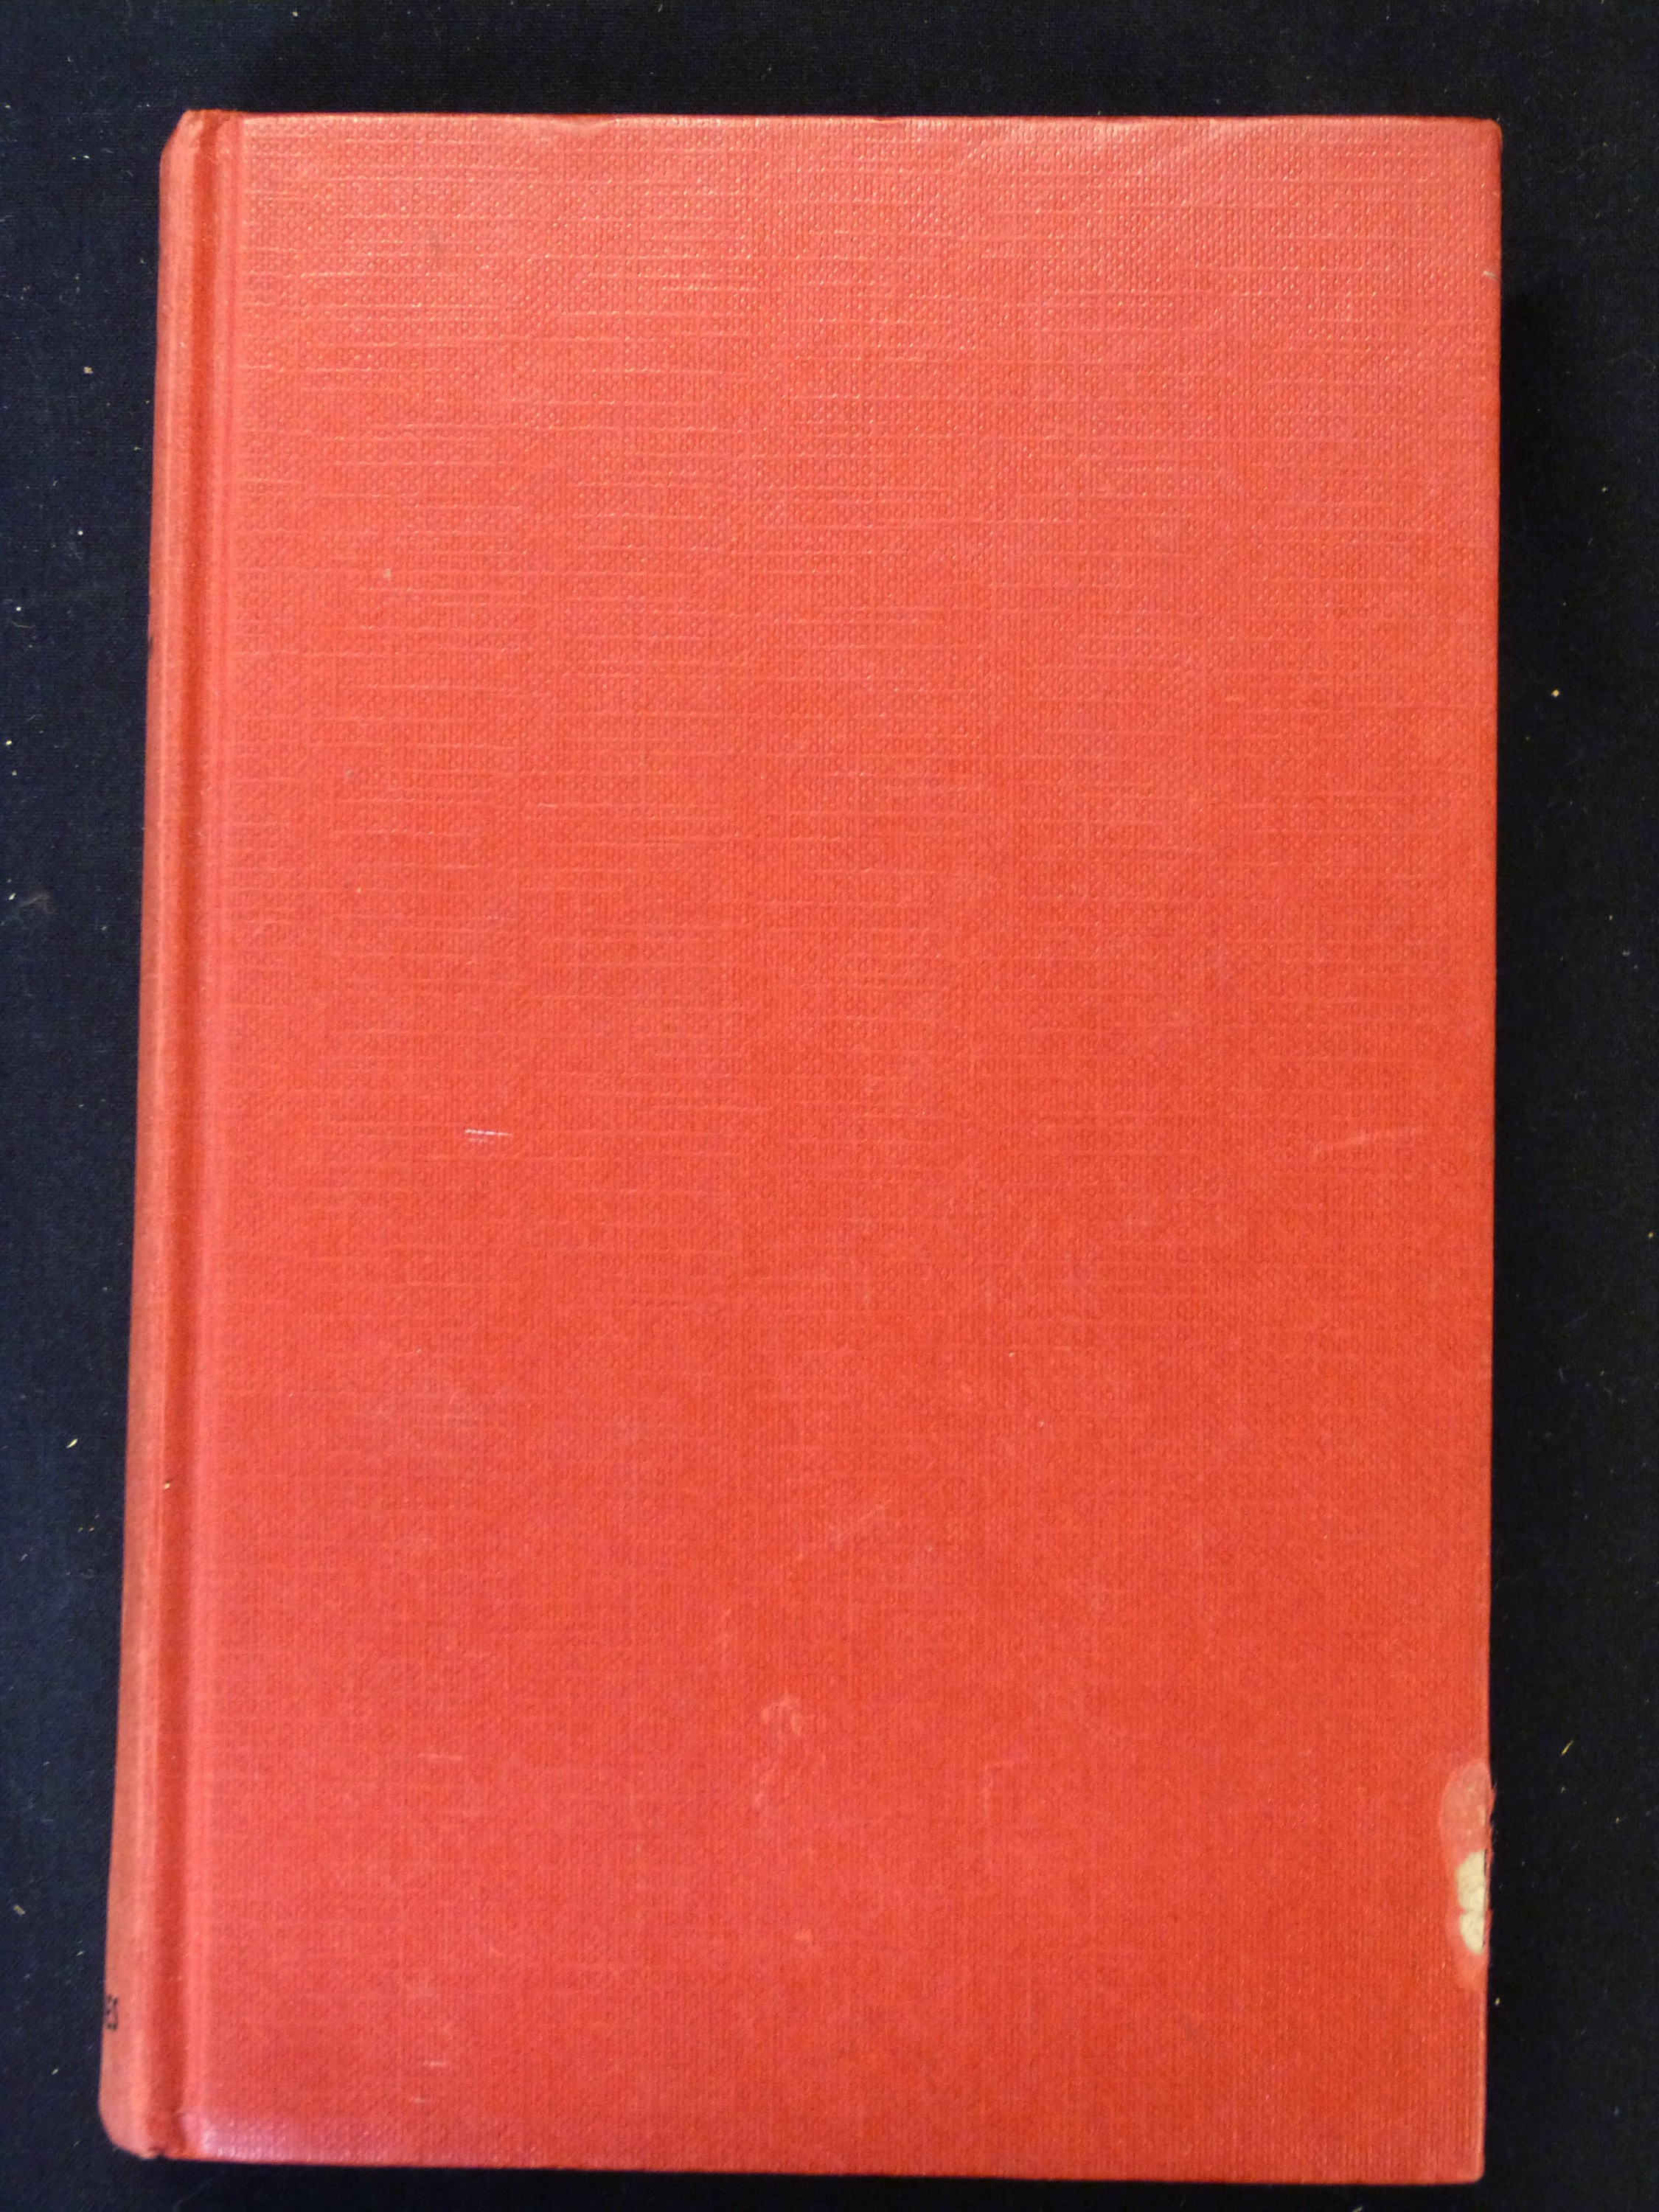 RICHMAL CROMPTON: WILLIAM THE LAWLESS, London, George Newnes, 1970, 1st edition, inscription on - Image 2 of 3